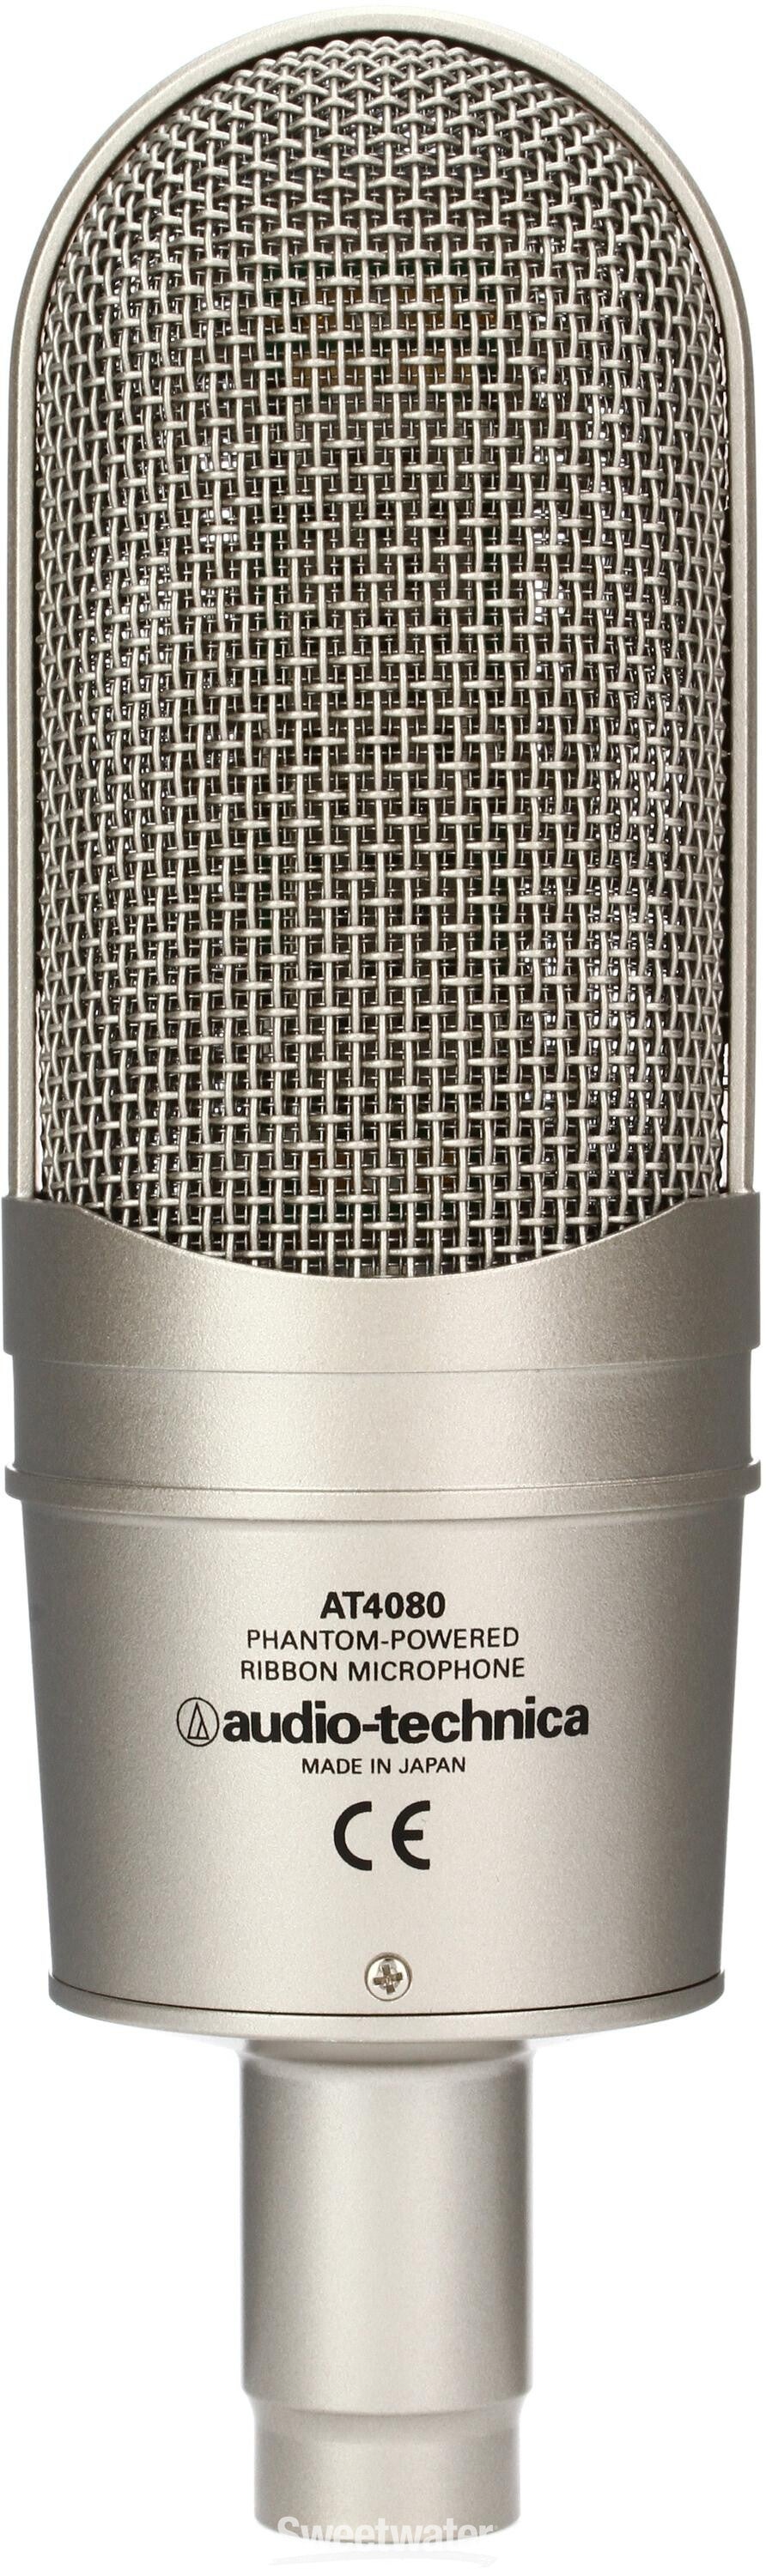 Audio-Technica AT4080 Active Ribbon Microphone